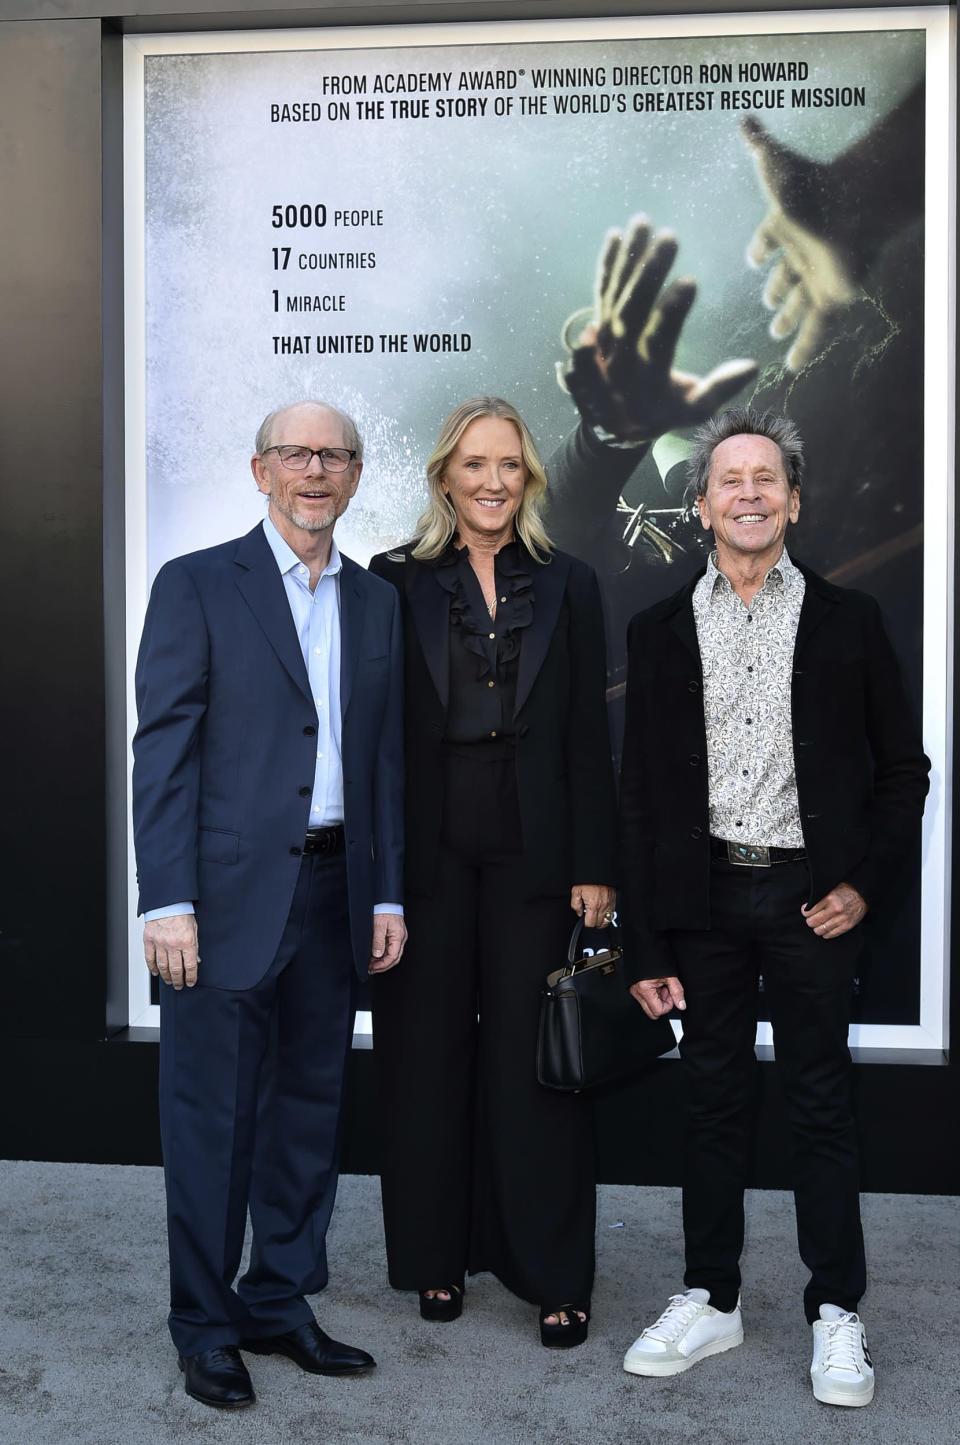 Ron Howard, Jennifer Salke and Brian Grazer, from left, arrive at the premiere of "Thirteen Lives" on Thursday, July 28, 2022, at Regency Village Theatre in Los Angeles. (Photo by Richard Shotwell/Invision/AP)